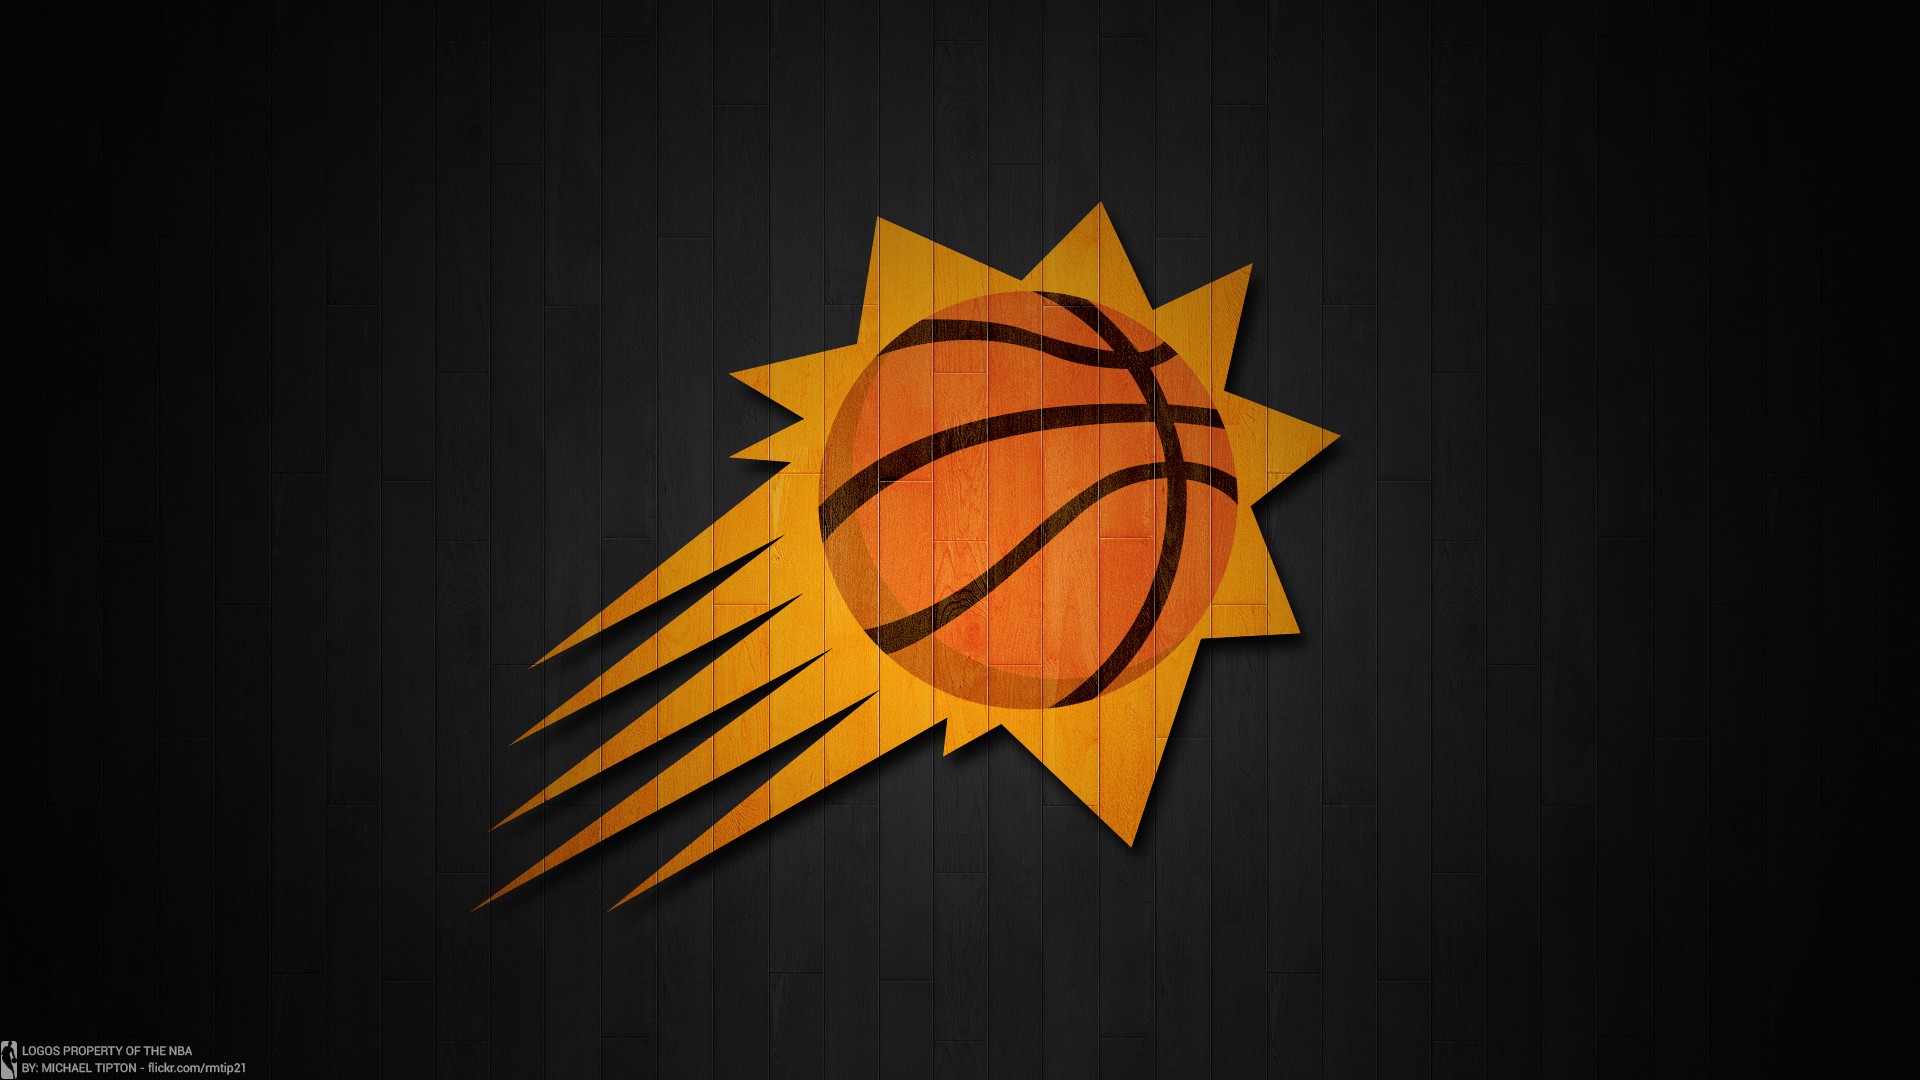 Wallpaper Desktop Phoenix Suns Logo HD with high-resolution 1920x1080 pixel. You can use this wallpaper for your Desktop Computer Backgrounds, Windows or Mac Screensavers, iPhone Lock screen, Tablet or Android and another Mobile Phone device